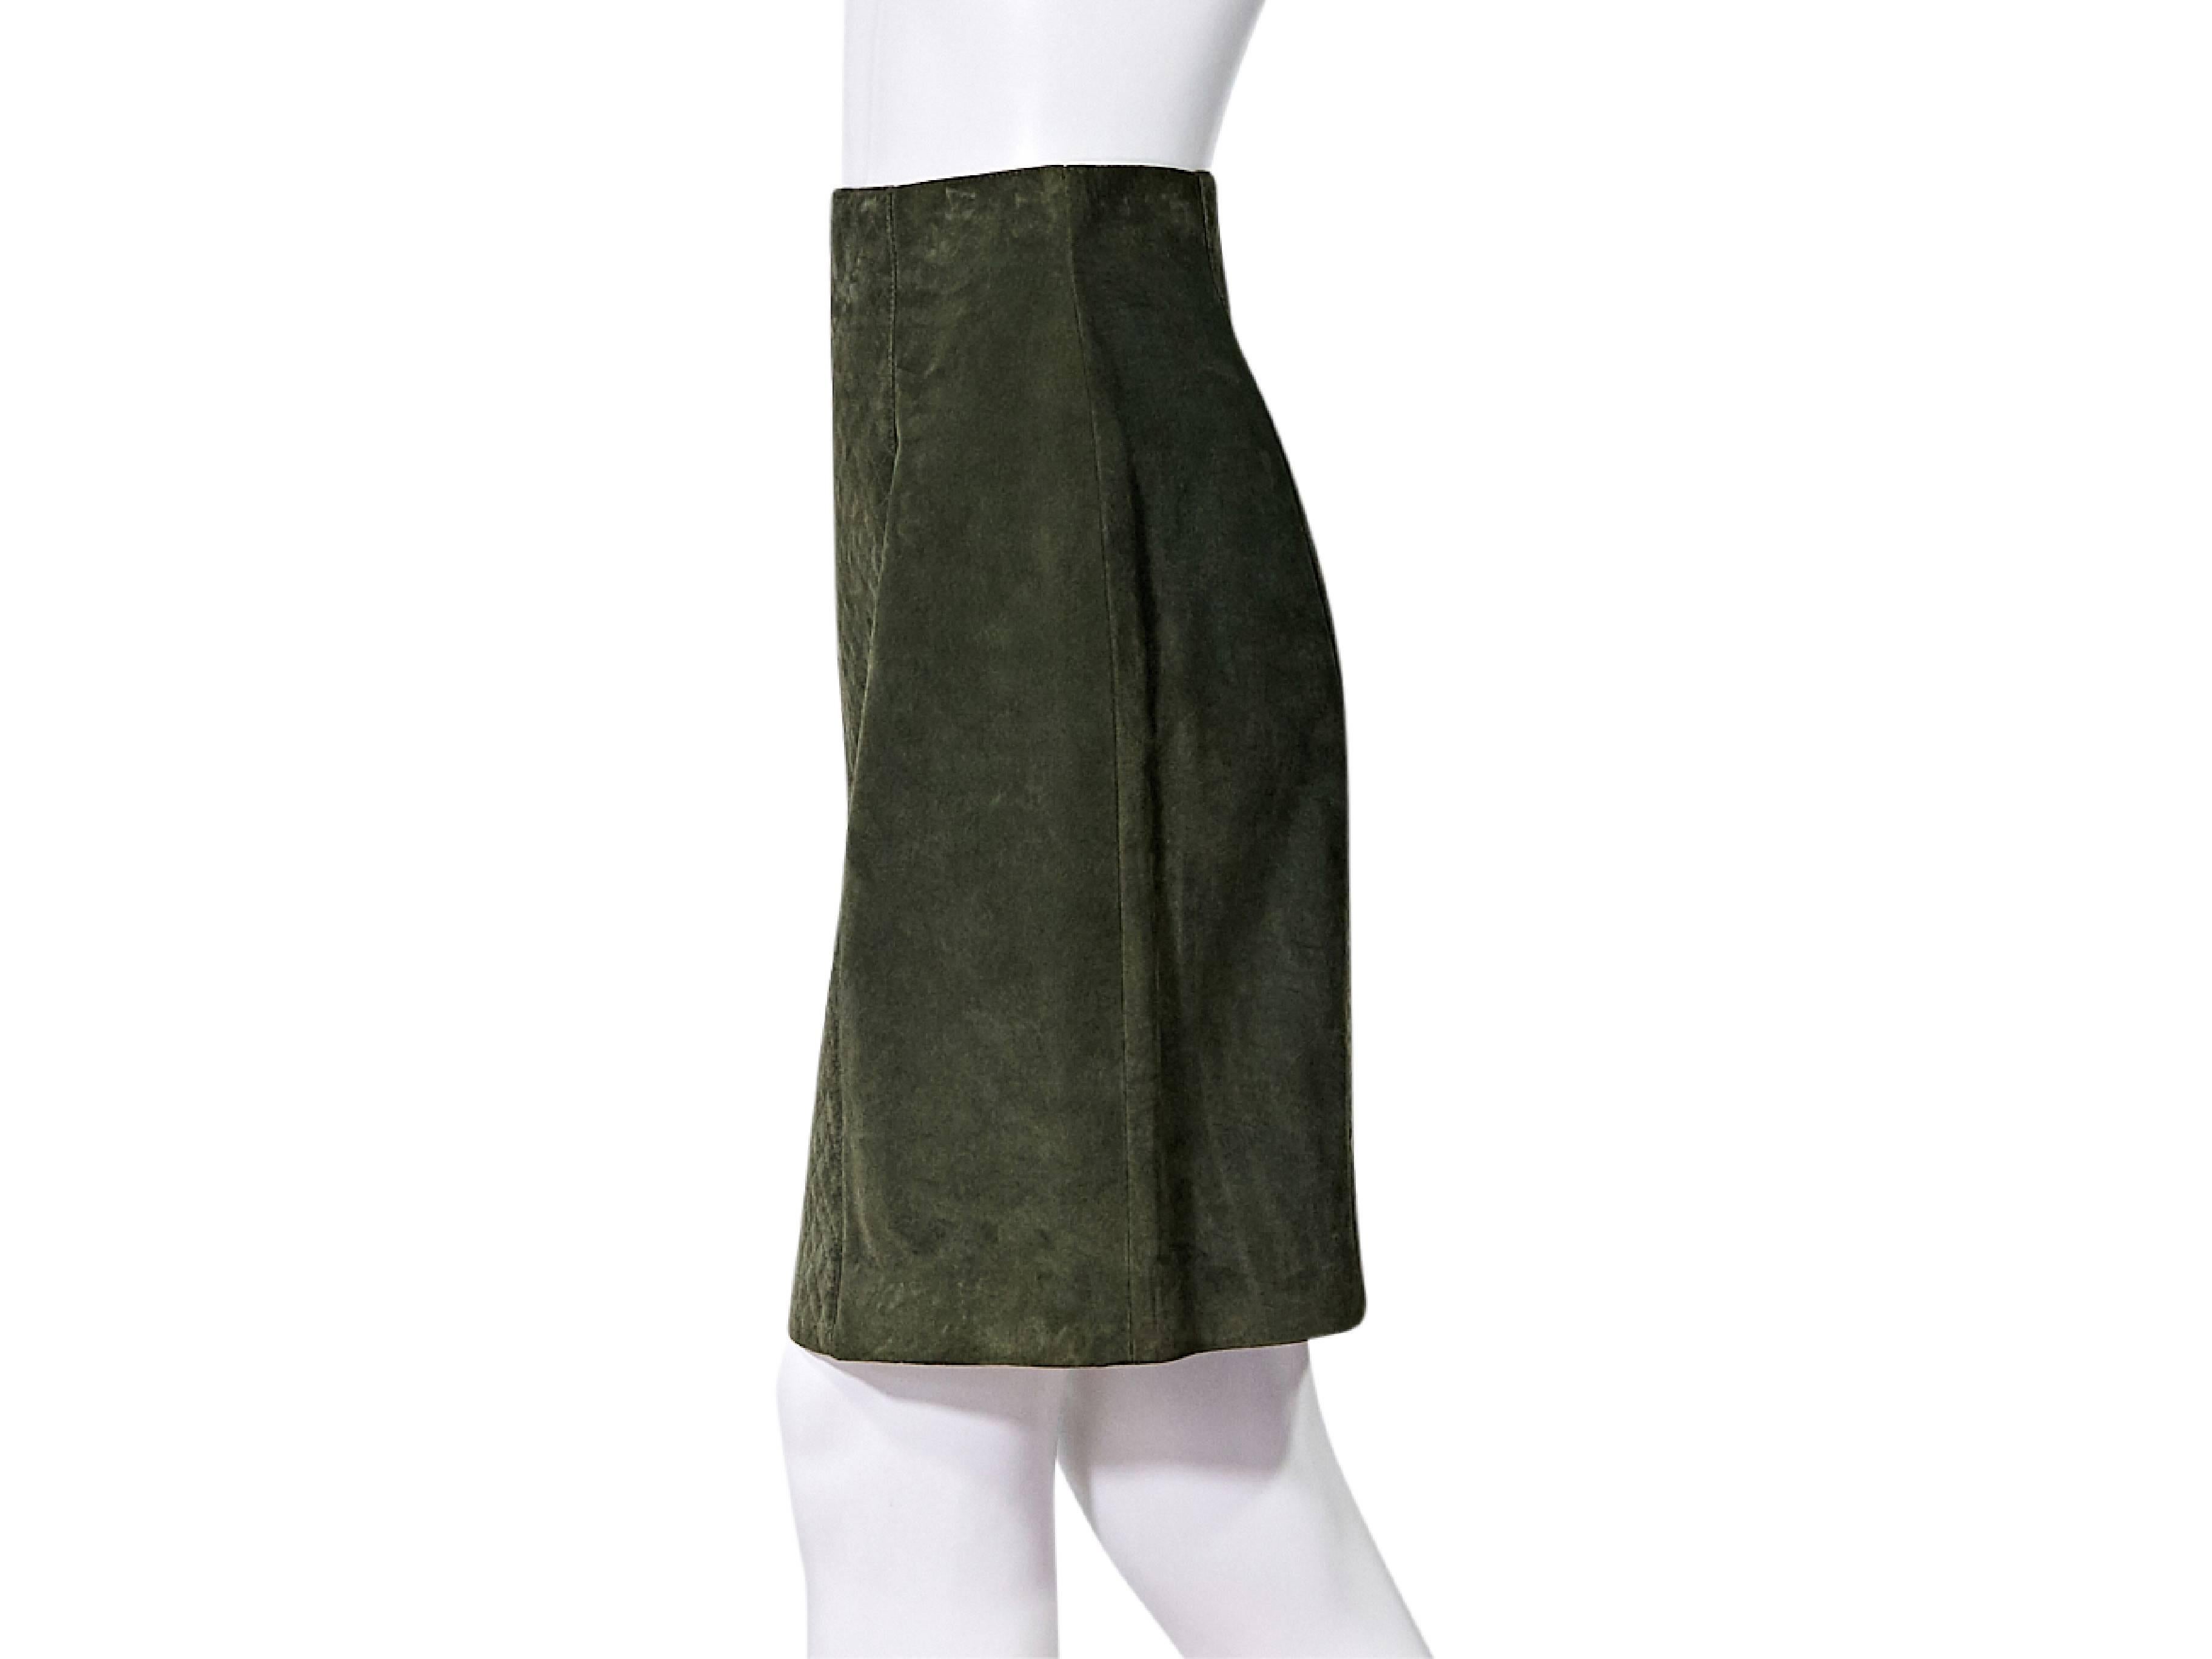 Product details:  Olive green suede pencil skirt by Chanel.  Quilted front panel.  Concealed back zip closure.  Double buttons at back hem.  Size XS
Condition: Pre-owned. Very good.

Est. Retail $ 735.00